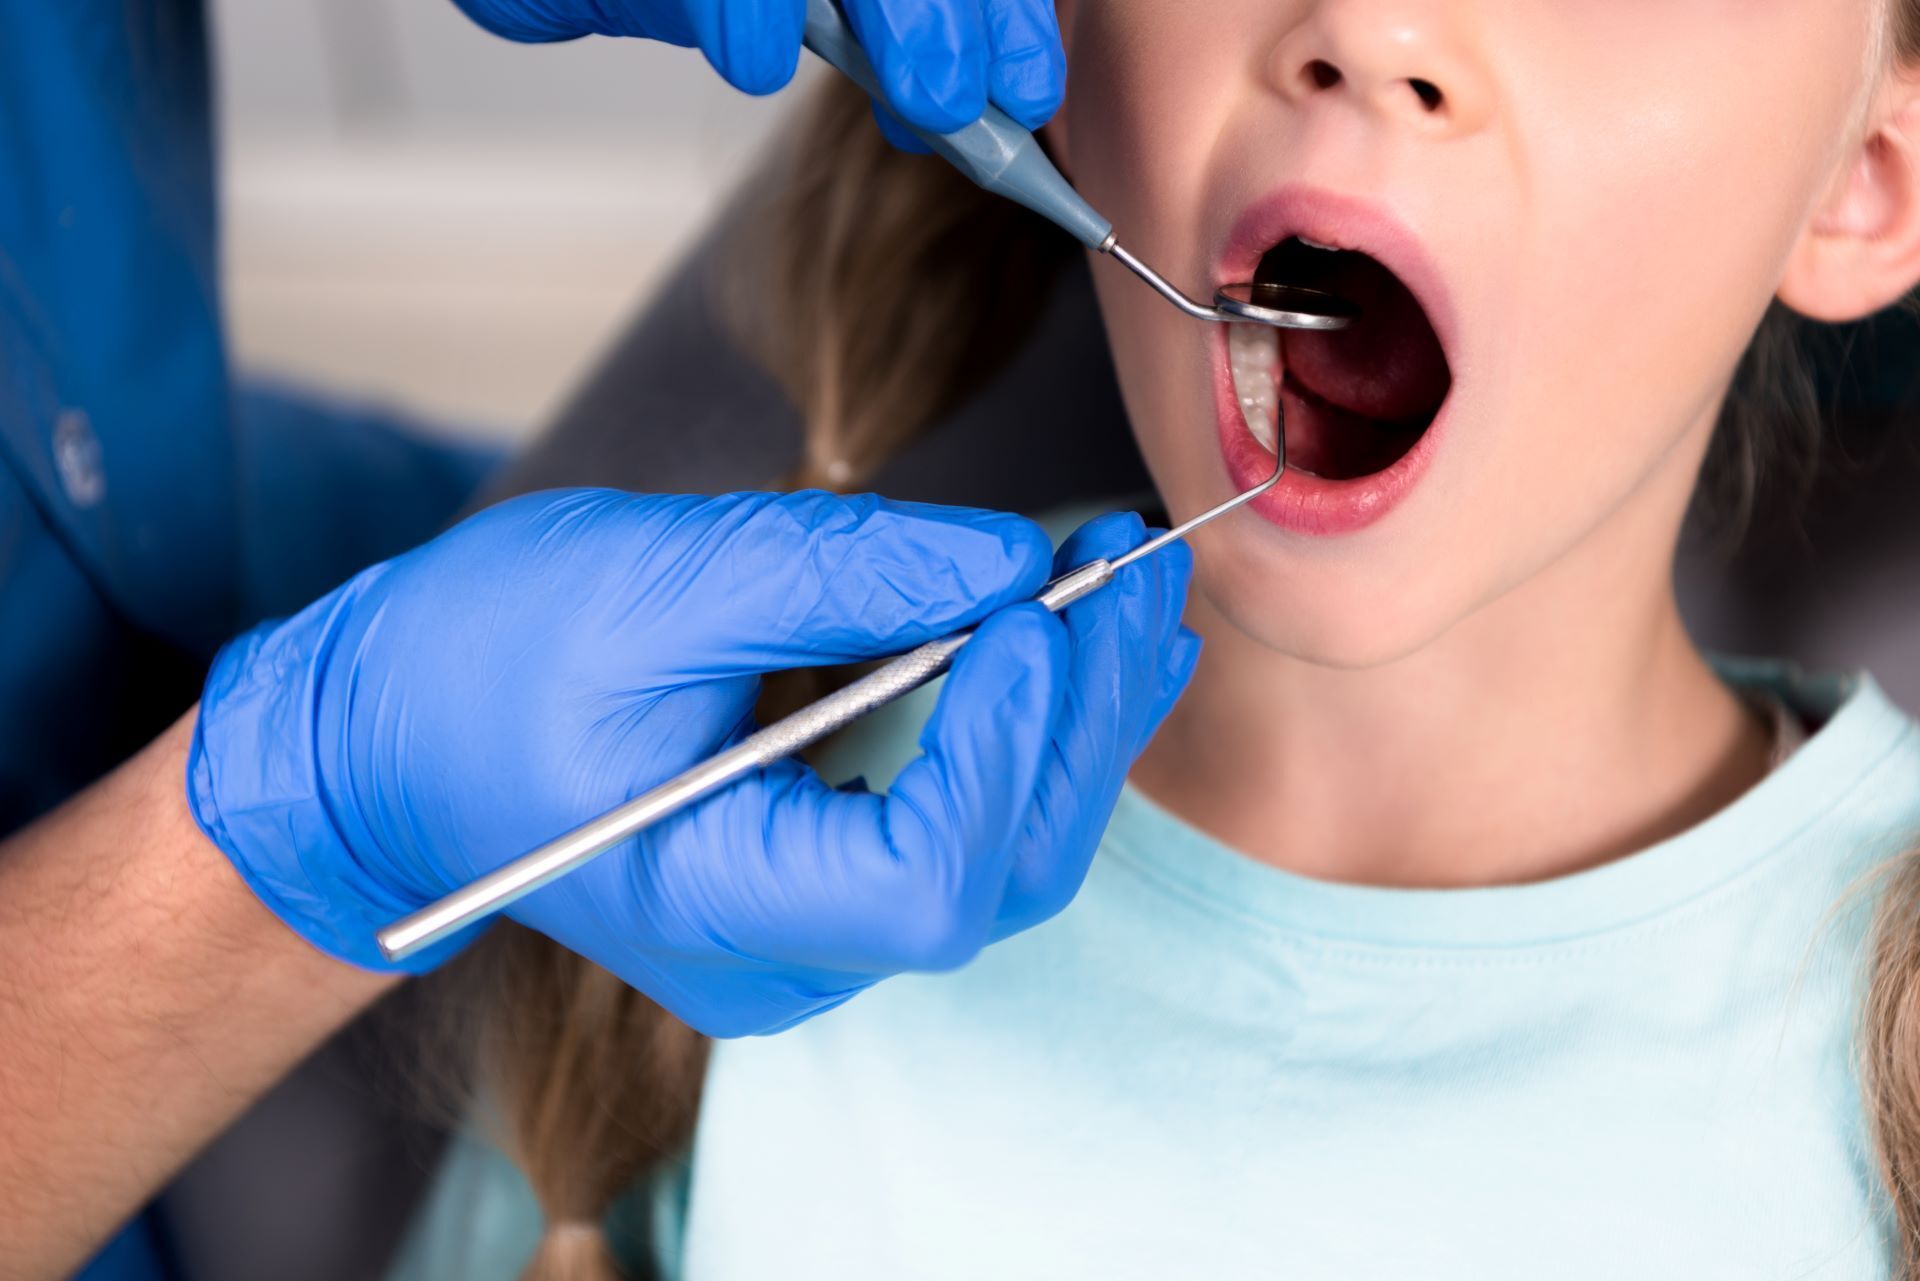 kid at dentist with mouth open